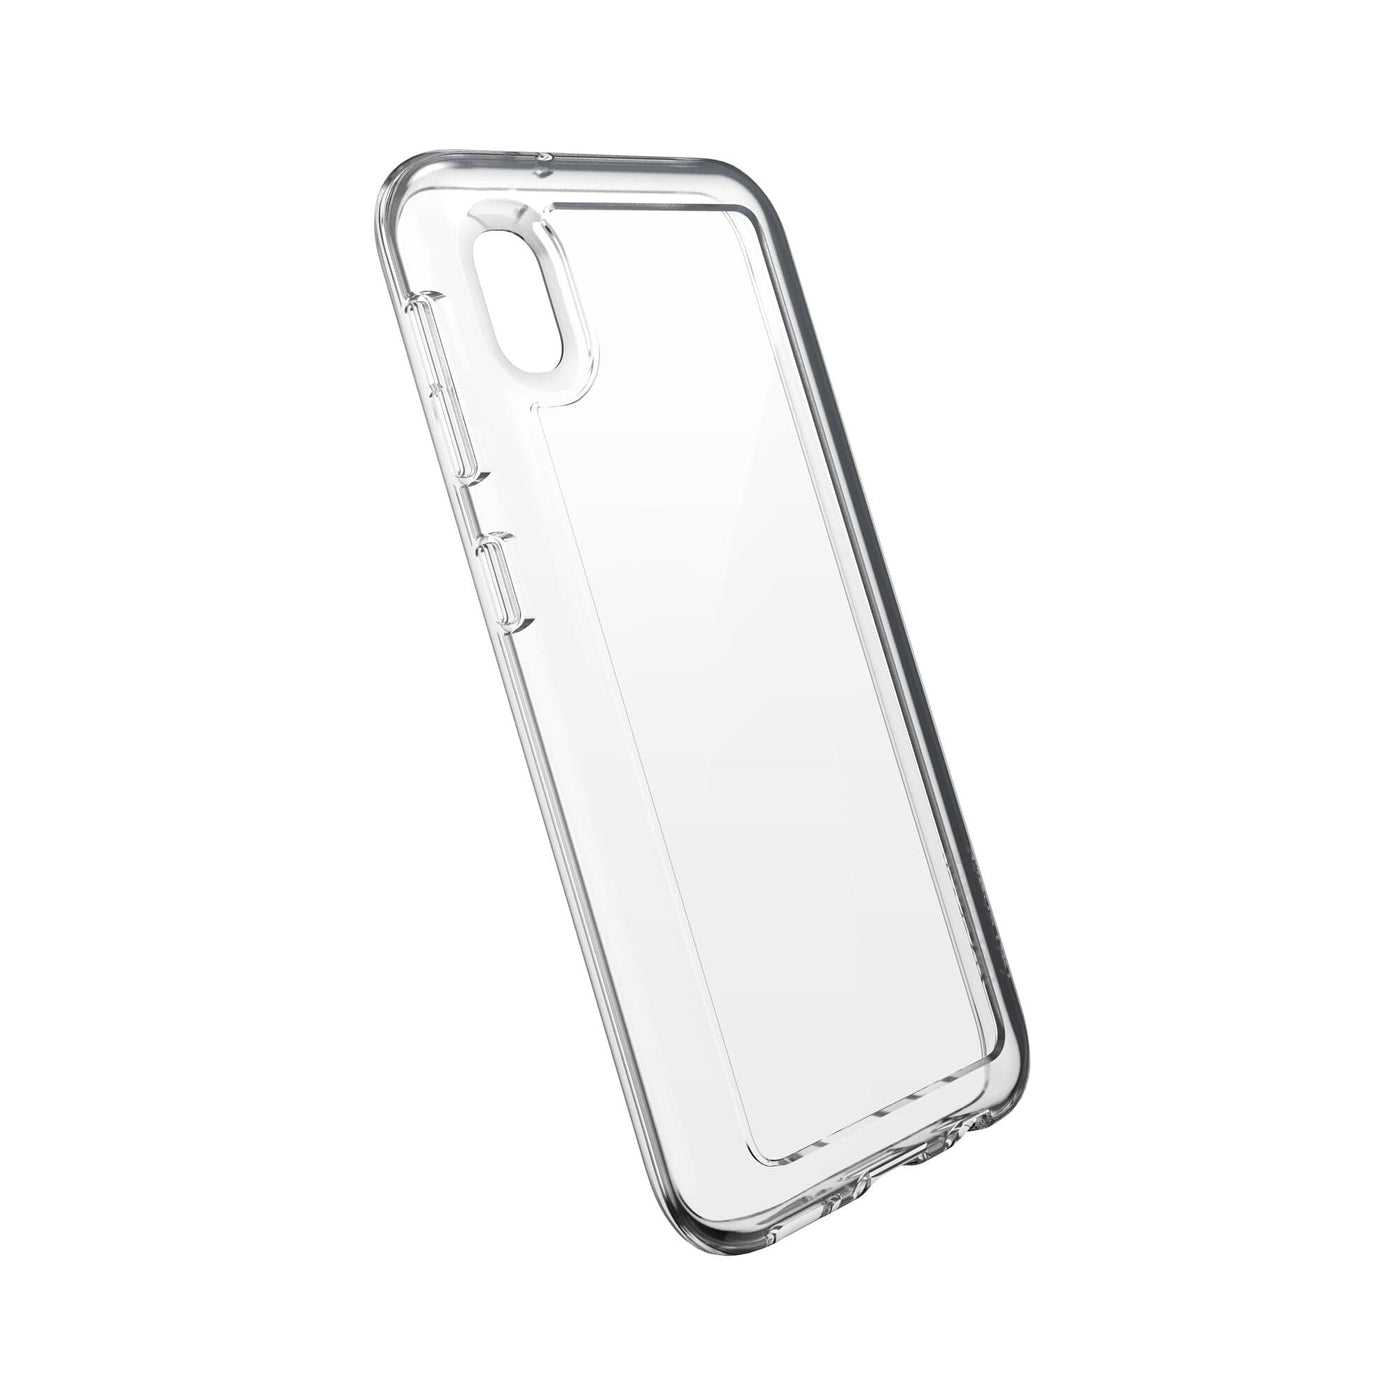 Speck Products -Protective Phone Cases for iPhone, Google, Samsung